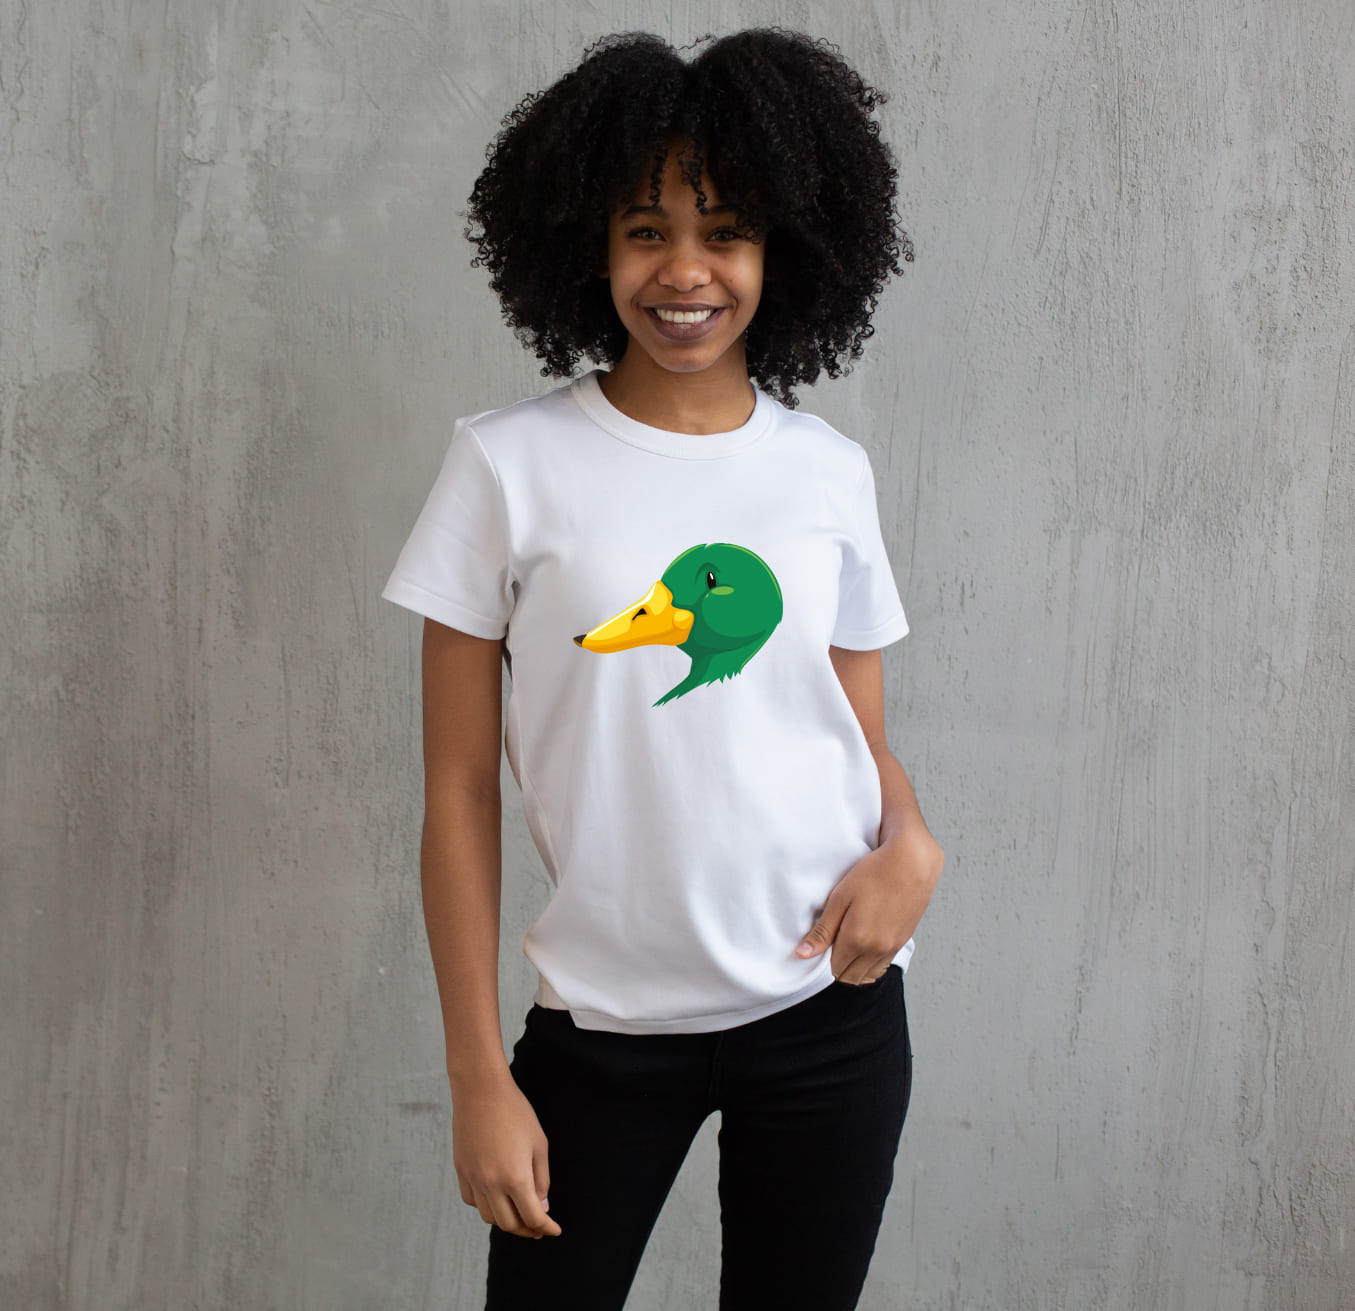 Image of a white t-shirt with a luxurious duck head print.